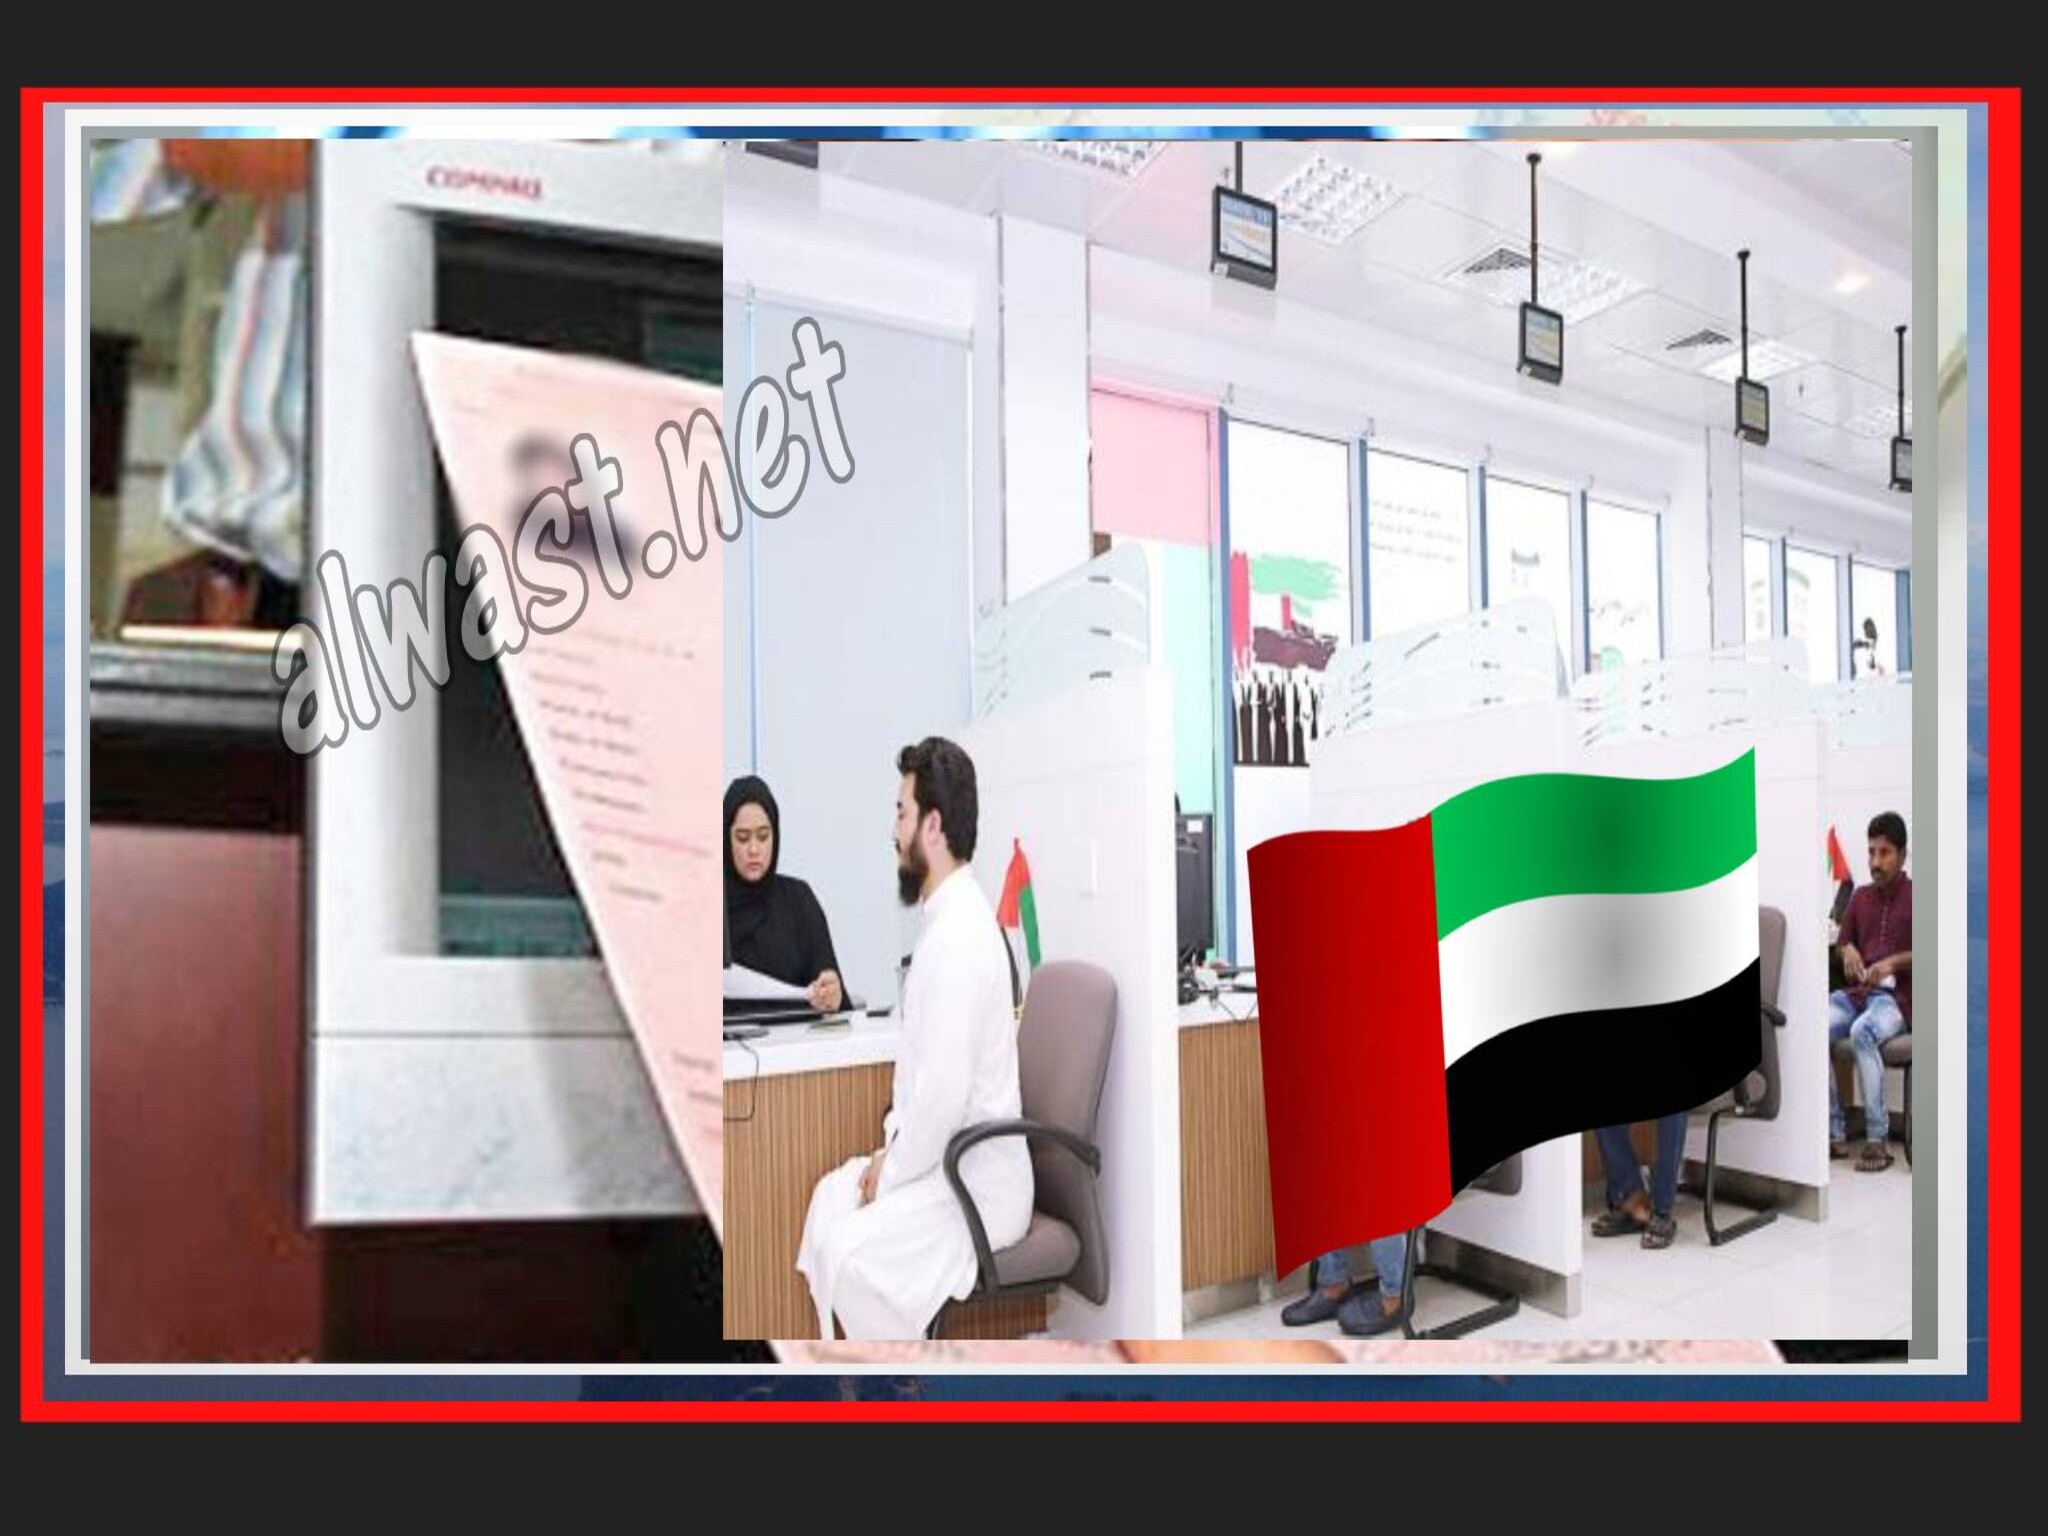  The UAE announces 4 types of residency visas that allow expats to work